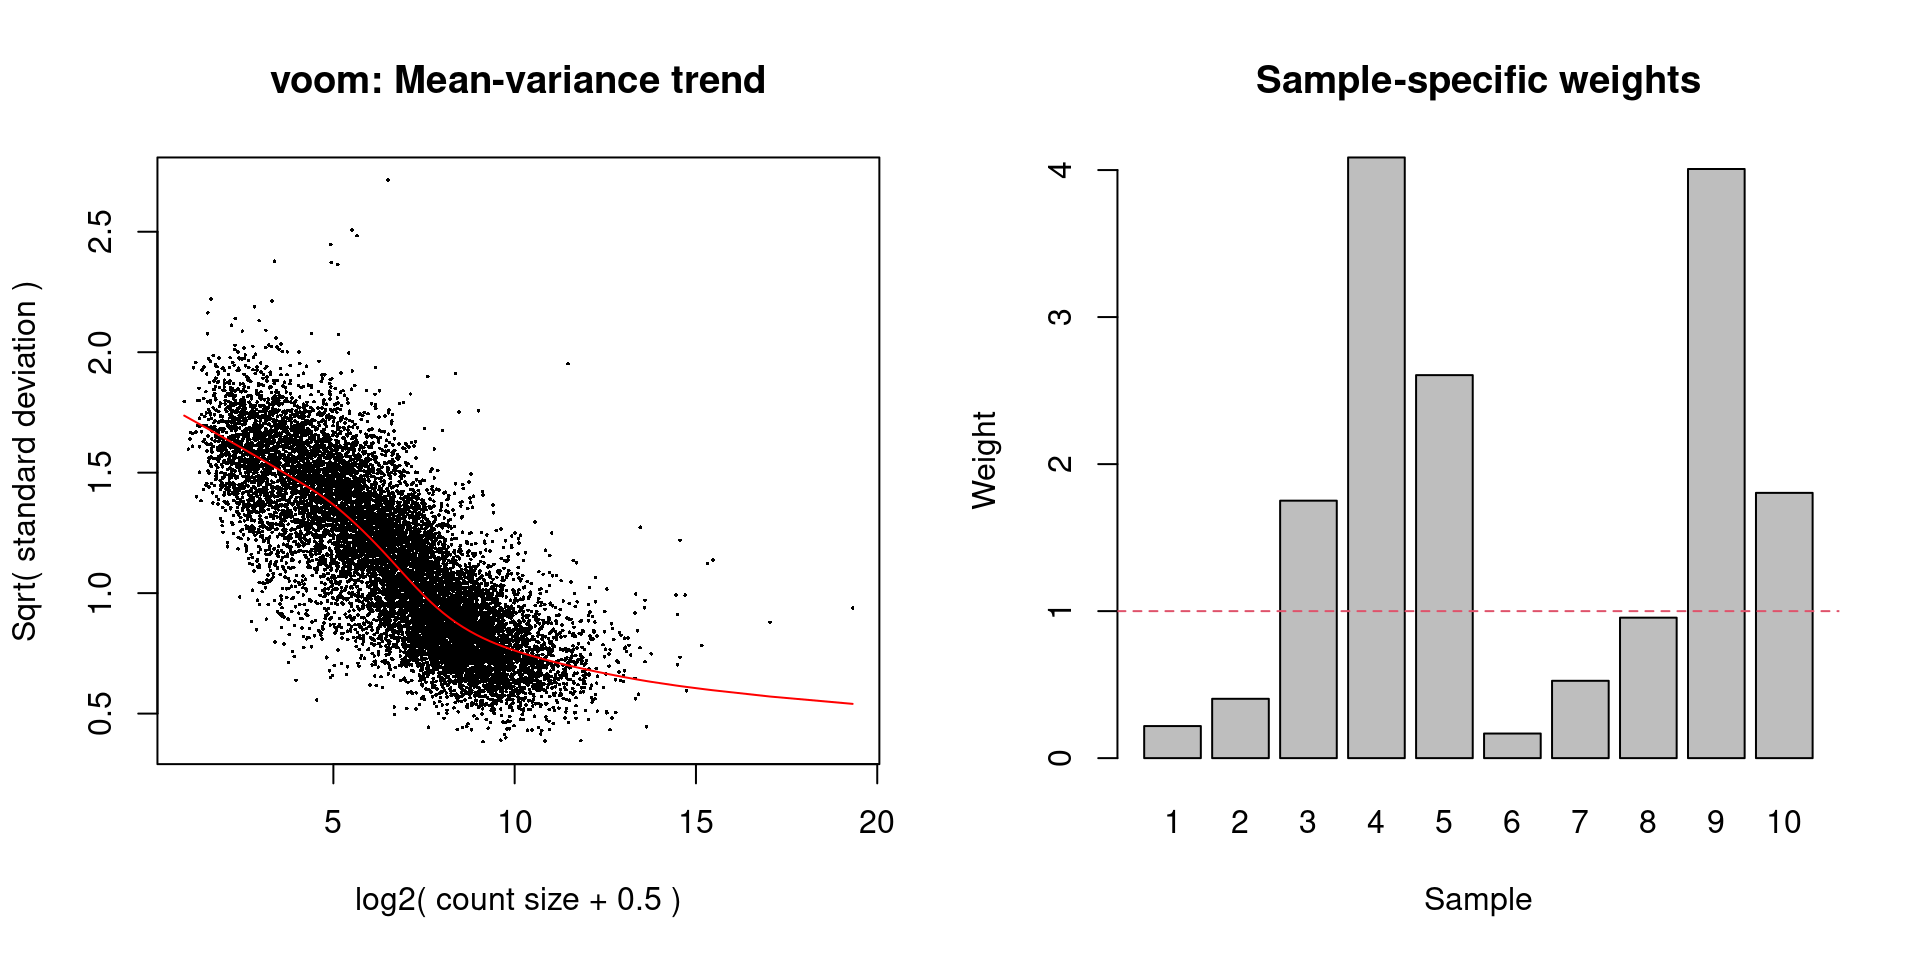 Diagnostic plots for `voom` after estimating observation and quality weights from the beta cell pseudo-bulk profiles. The left plot shows the mean-variance trend used to estimate the observation weights, while the right plot shows the per-sample quality weights.